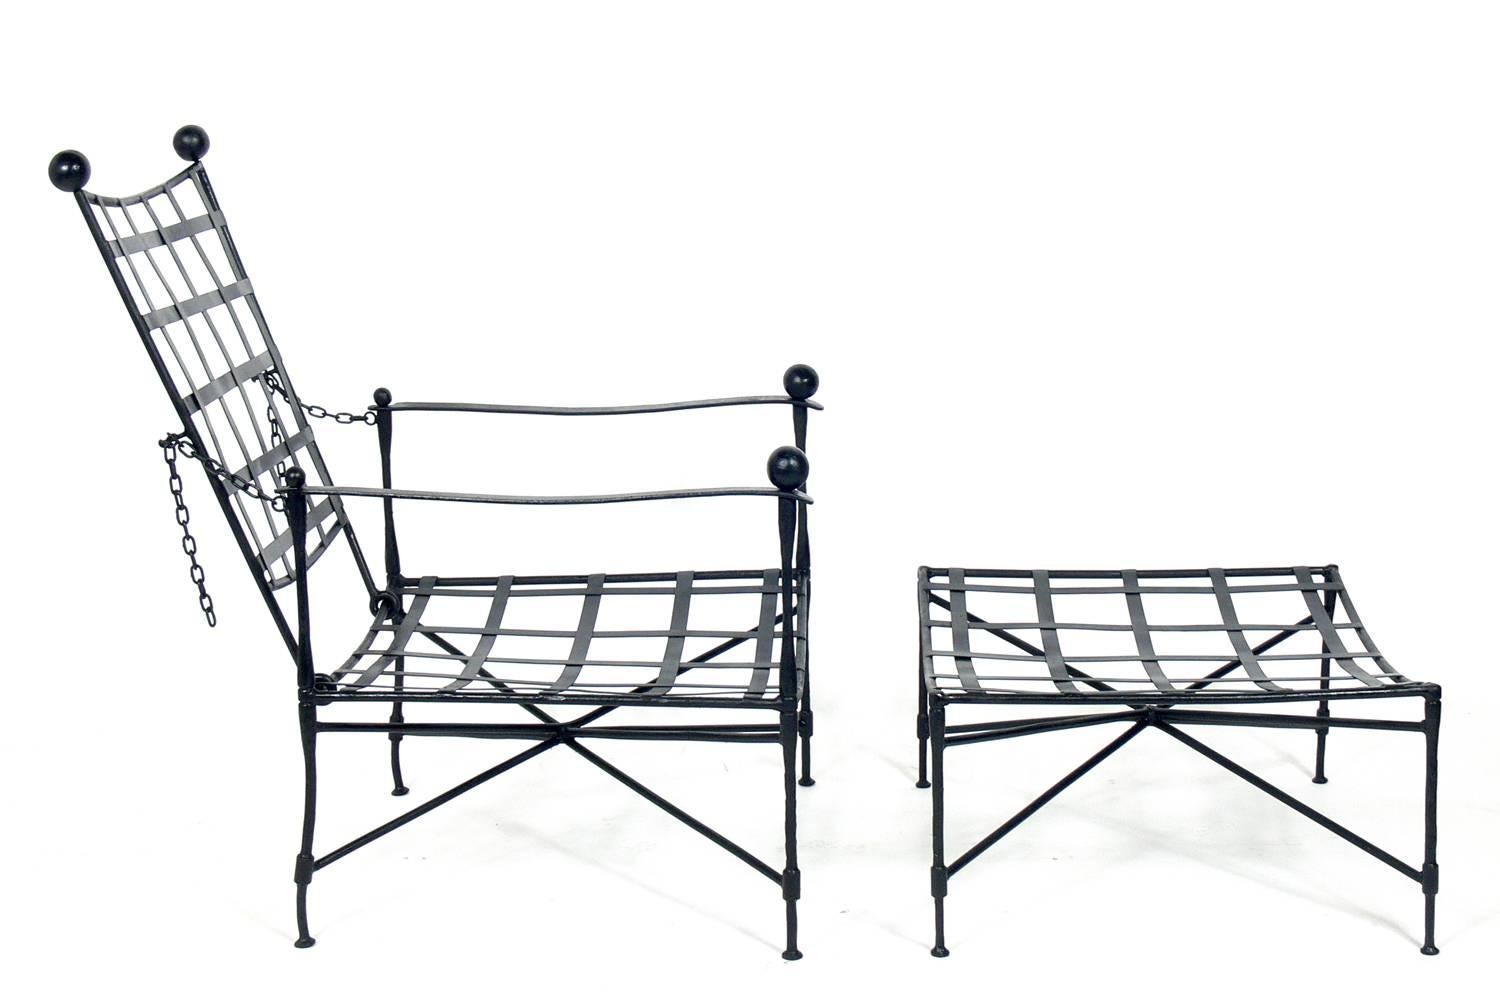 Rare set of four iron lounge chairs and ottomans designed by Mario Papperzini for Salterini, Italian, circa 1950s. Very rare to find a matched set of four chairs and ottomans from the same estate! This is a versatile form and it can be used indoors